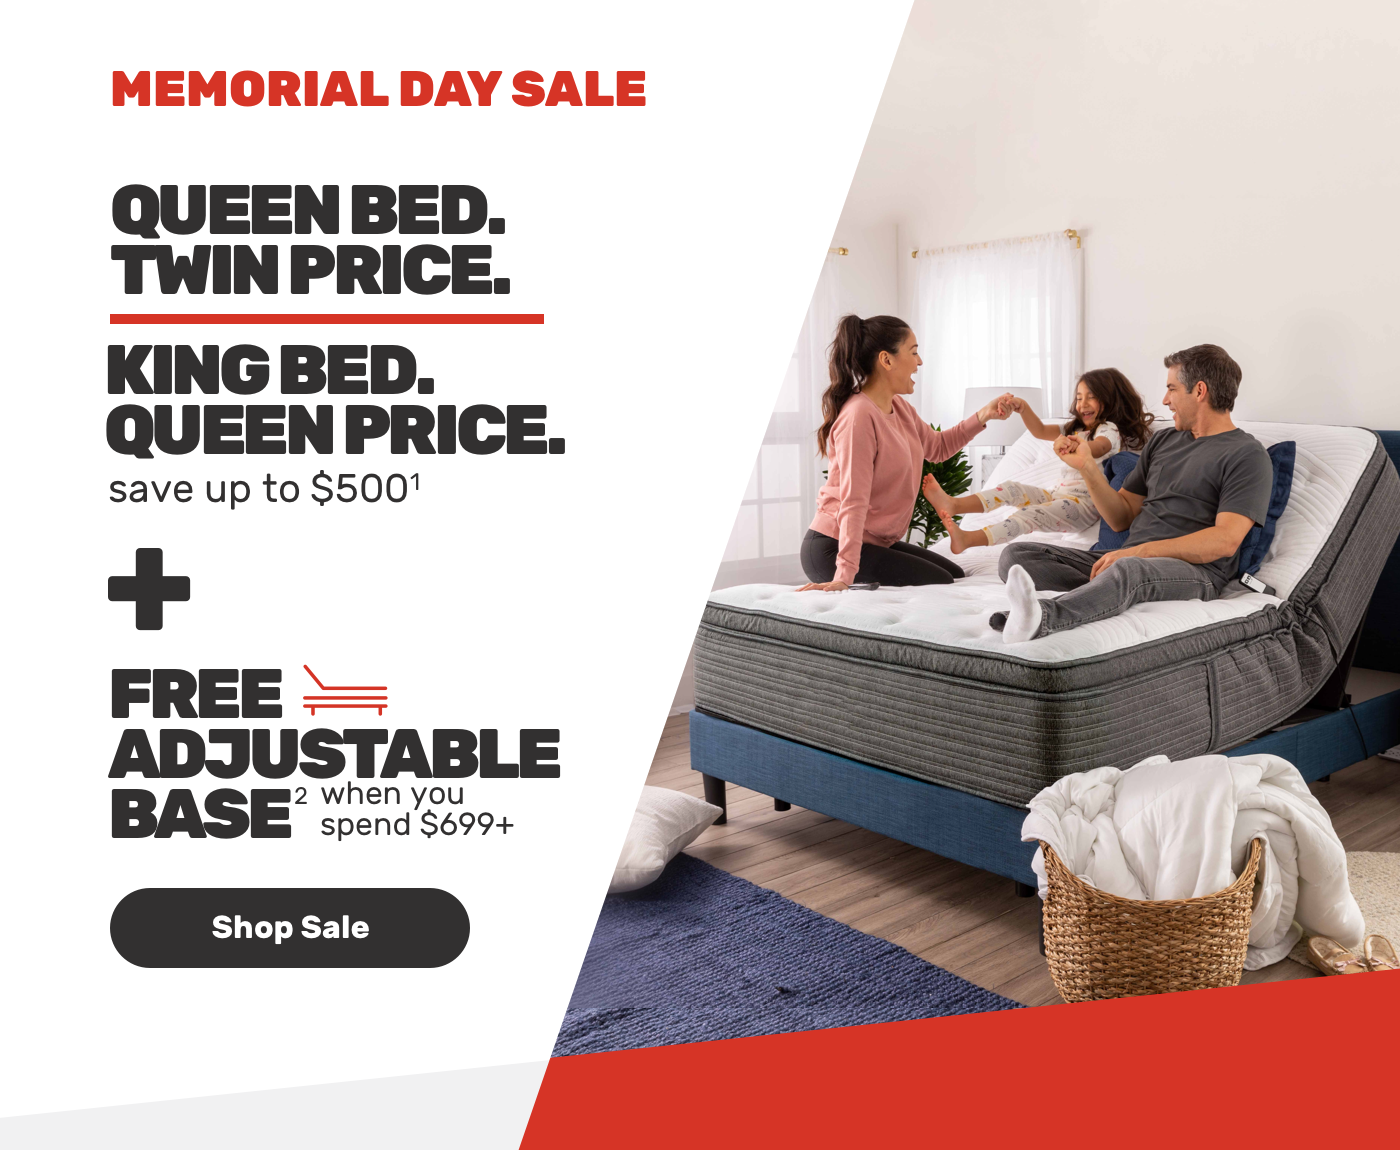 MEMORIAL DAY SALE-Queen bed Twin price-King bed Queen price.save up to $500-FREE ADJUSTABLE BASE-when you spend $699+